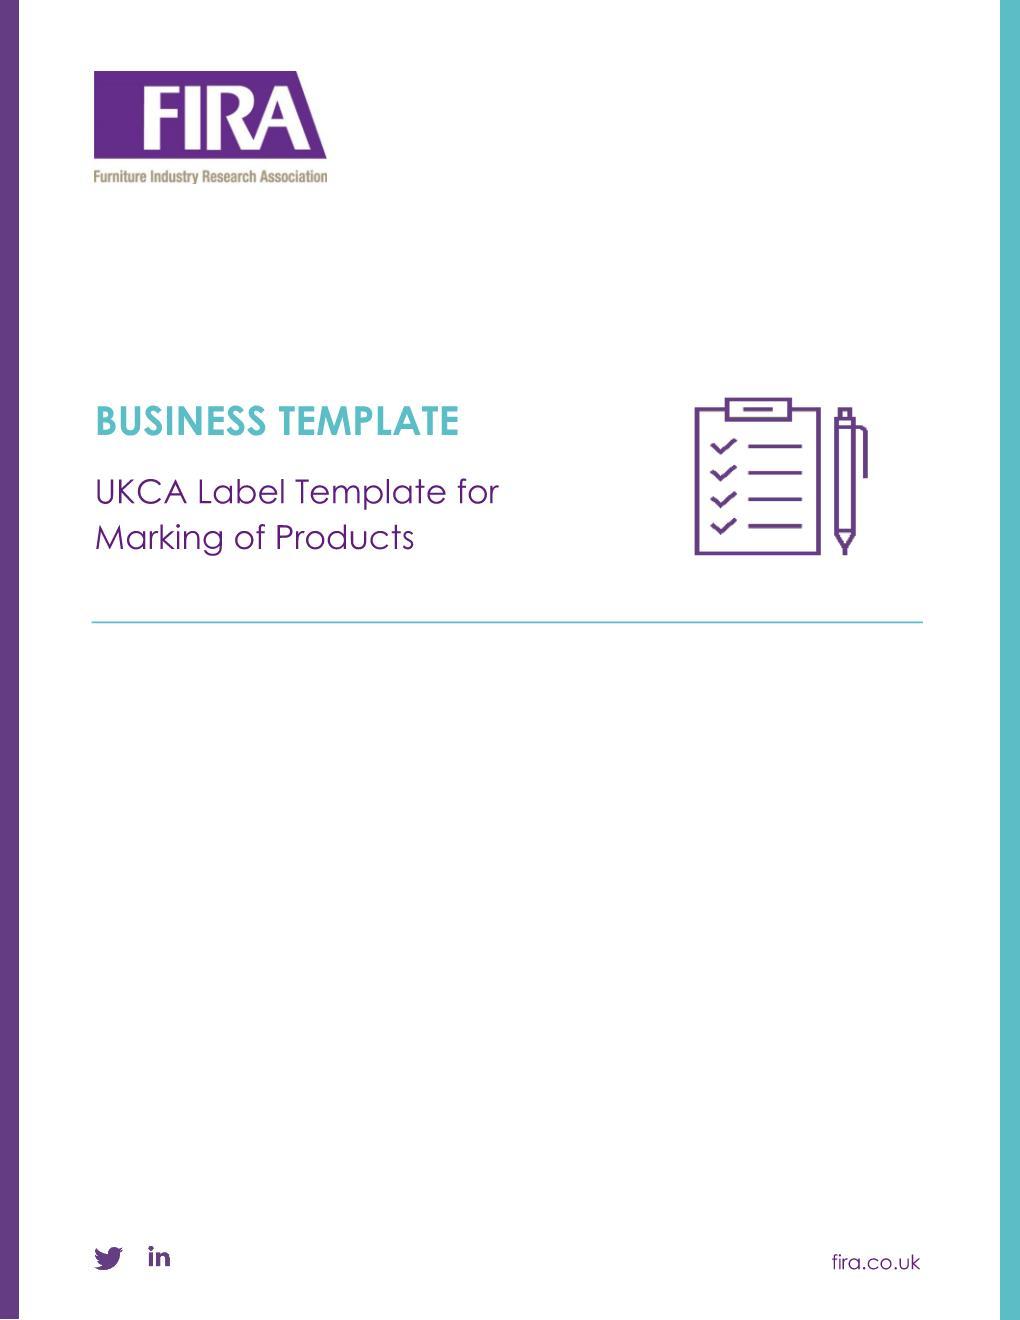 UKCA Labelling Guidance and Template